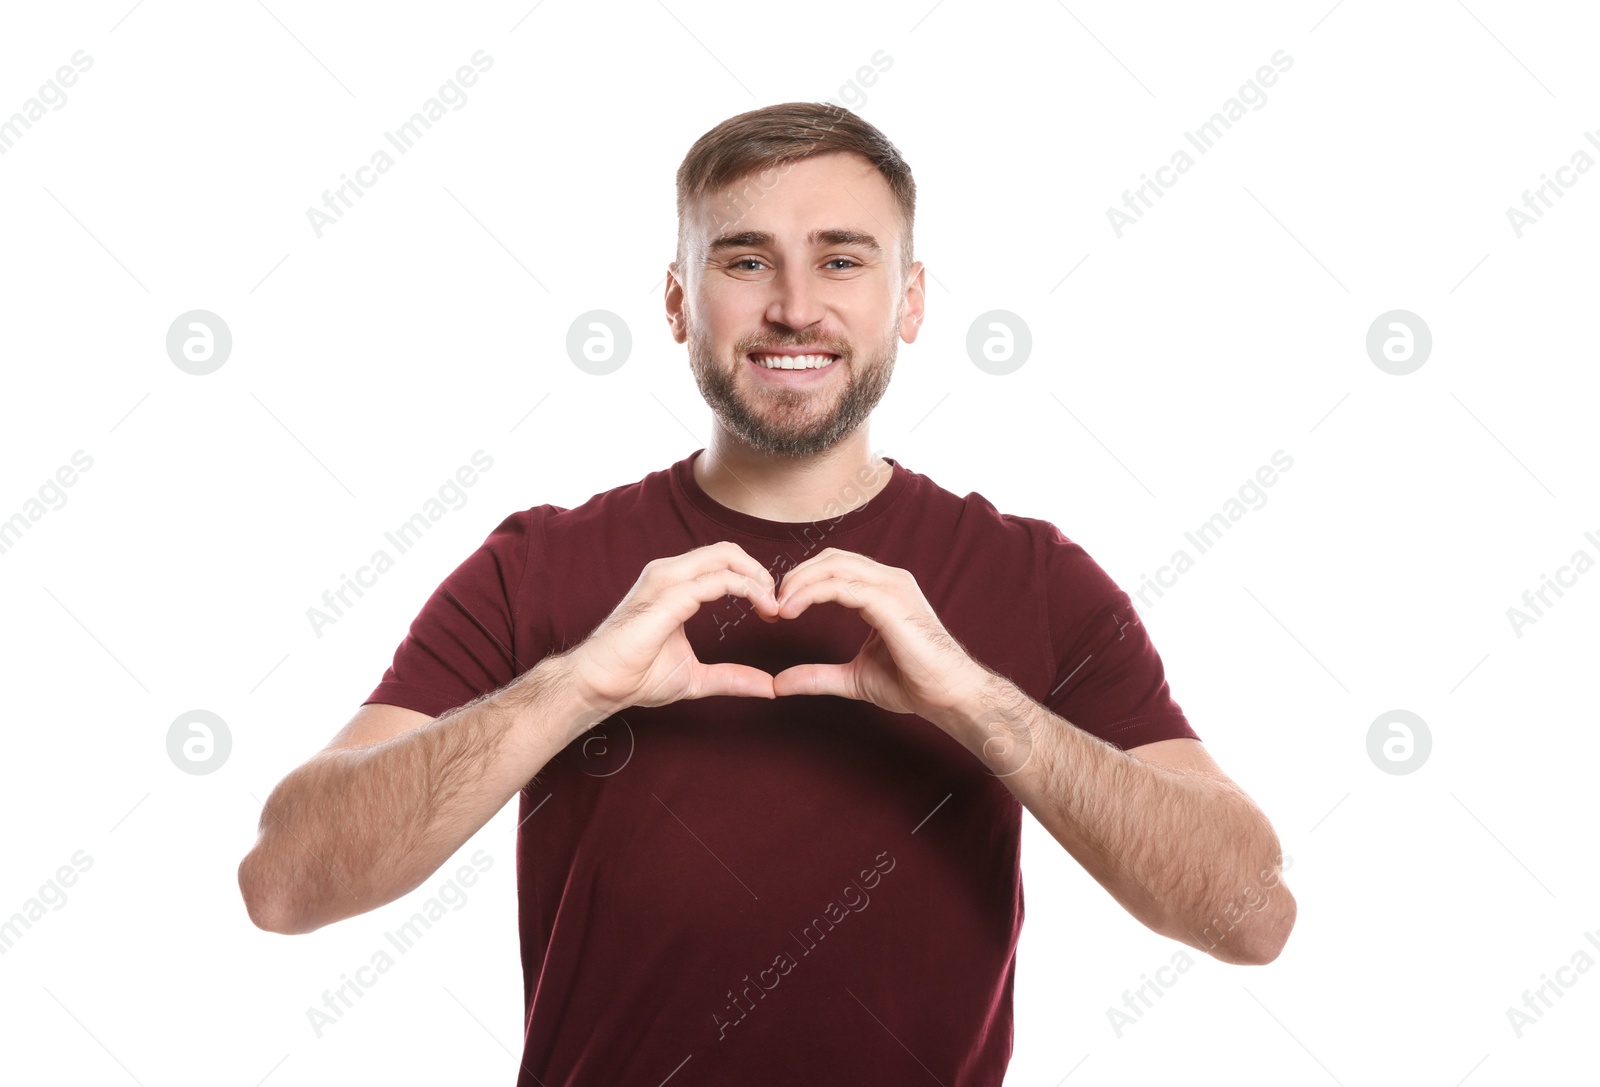 Photo of Man showing HEART gesture in sign language on white background